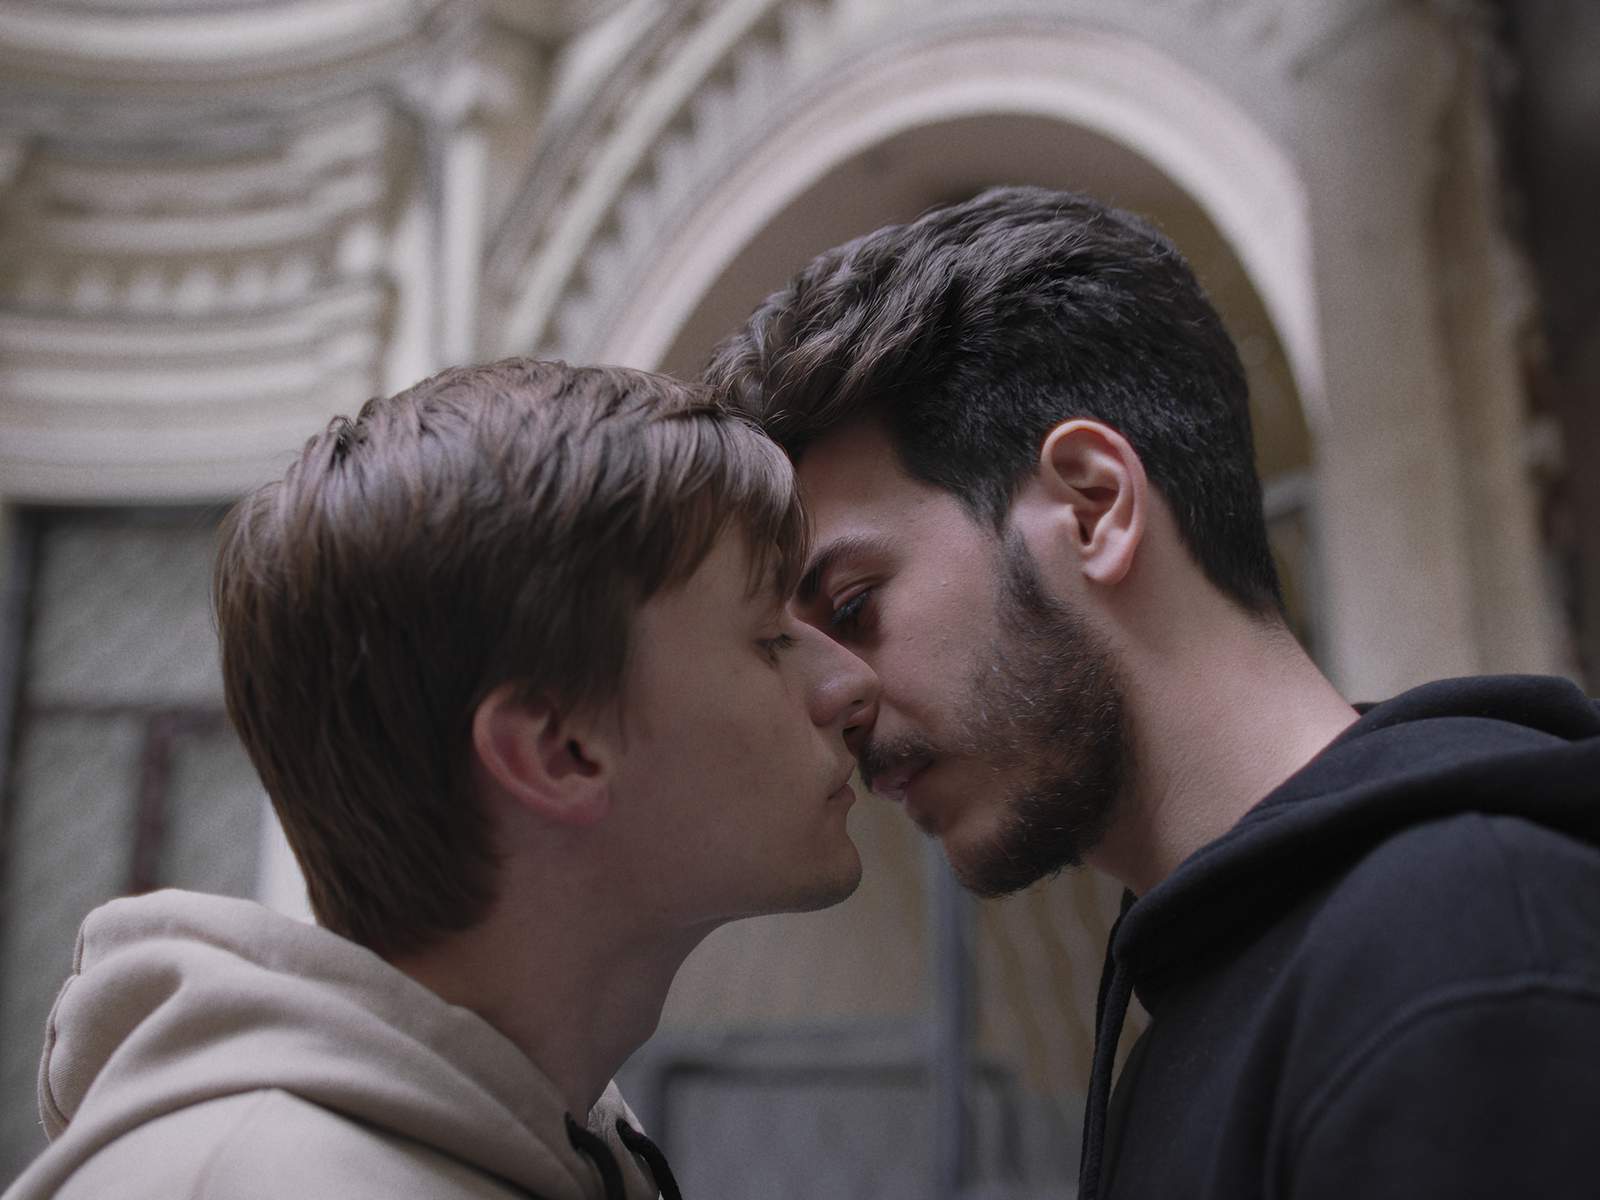 Queer online series meets eager Russian LGBTQ audience